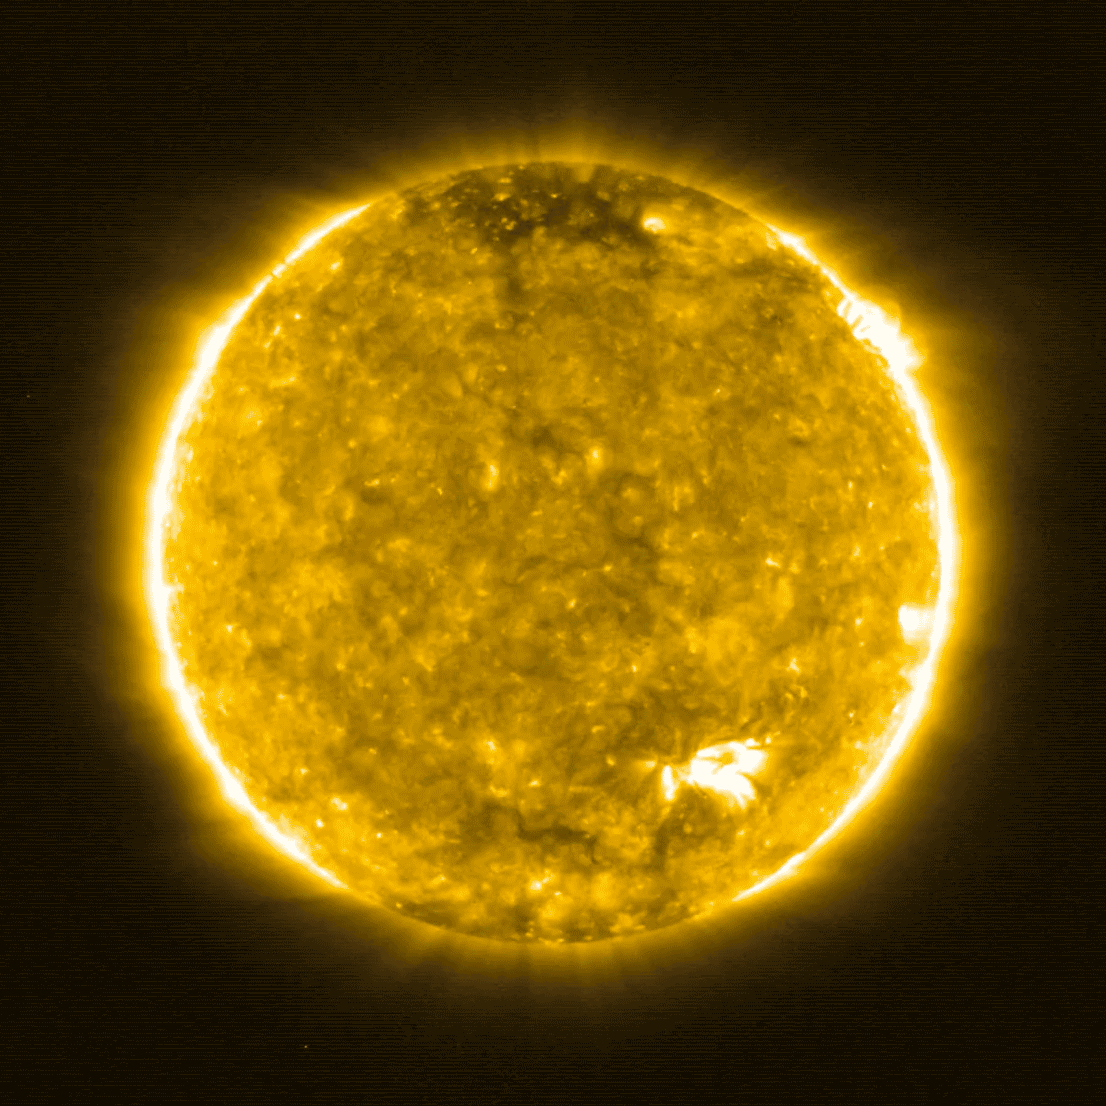 Images of the Sun captured by the Extreme Ultraviolet Imager instrument.